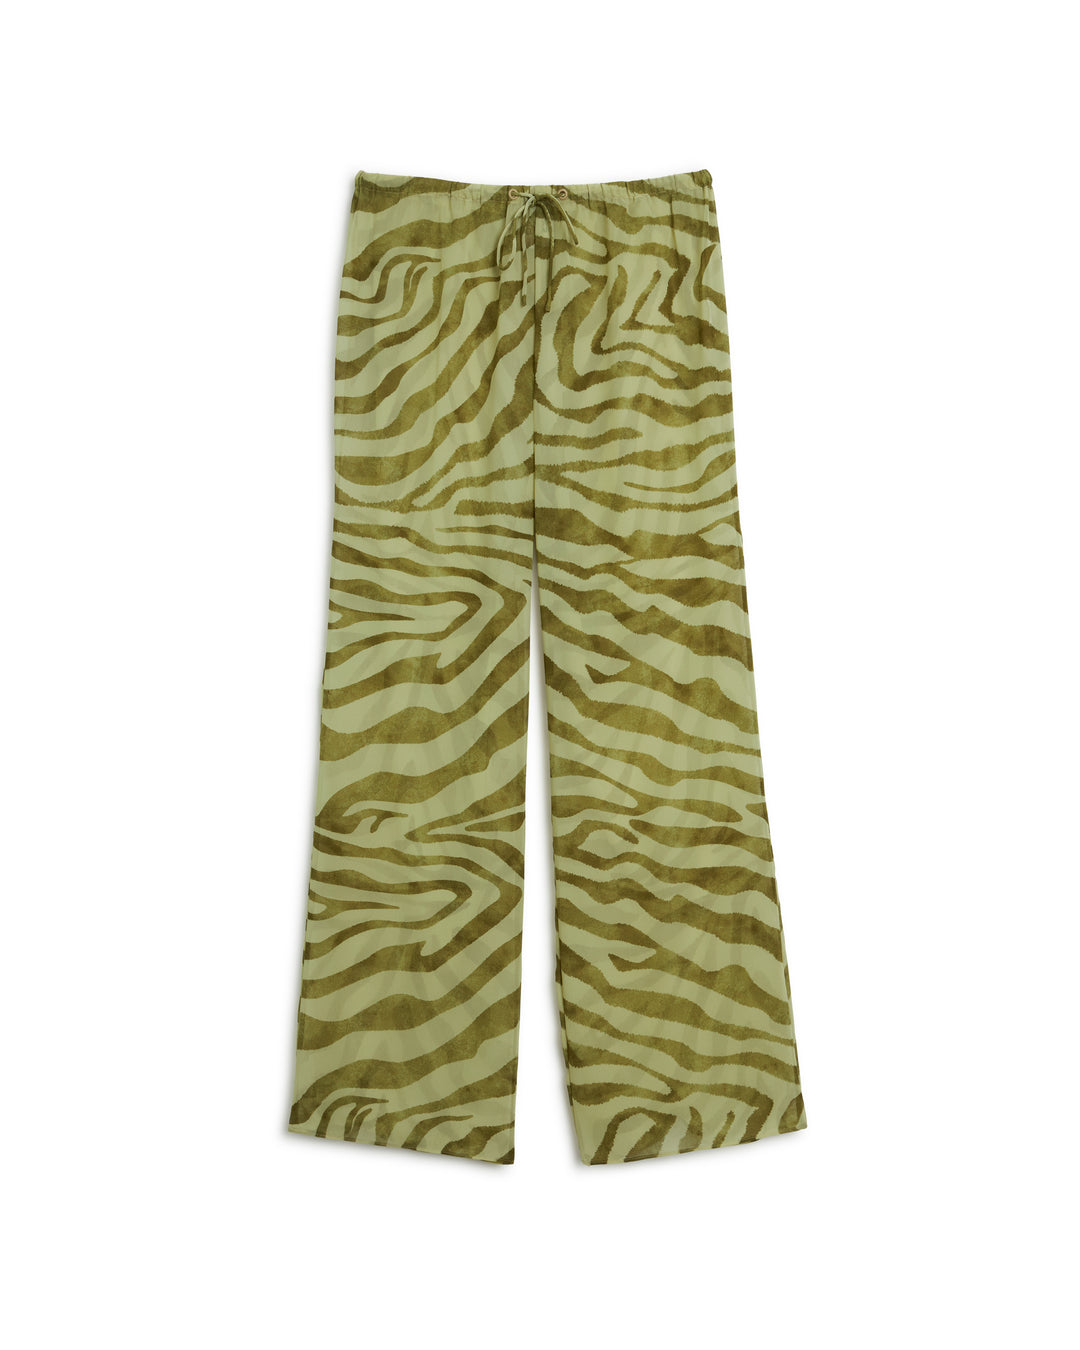 A pair of The Cayman Pants - Arbequina by Dandy Del Mar, featuring green zebra print on a white background.